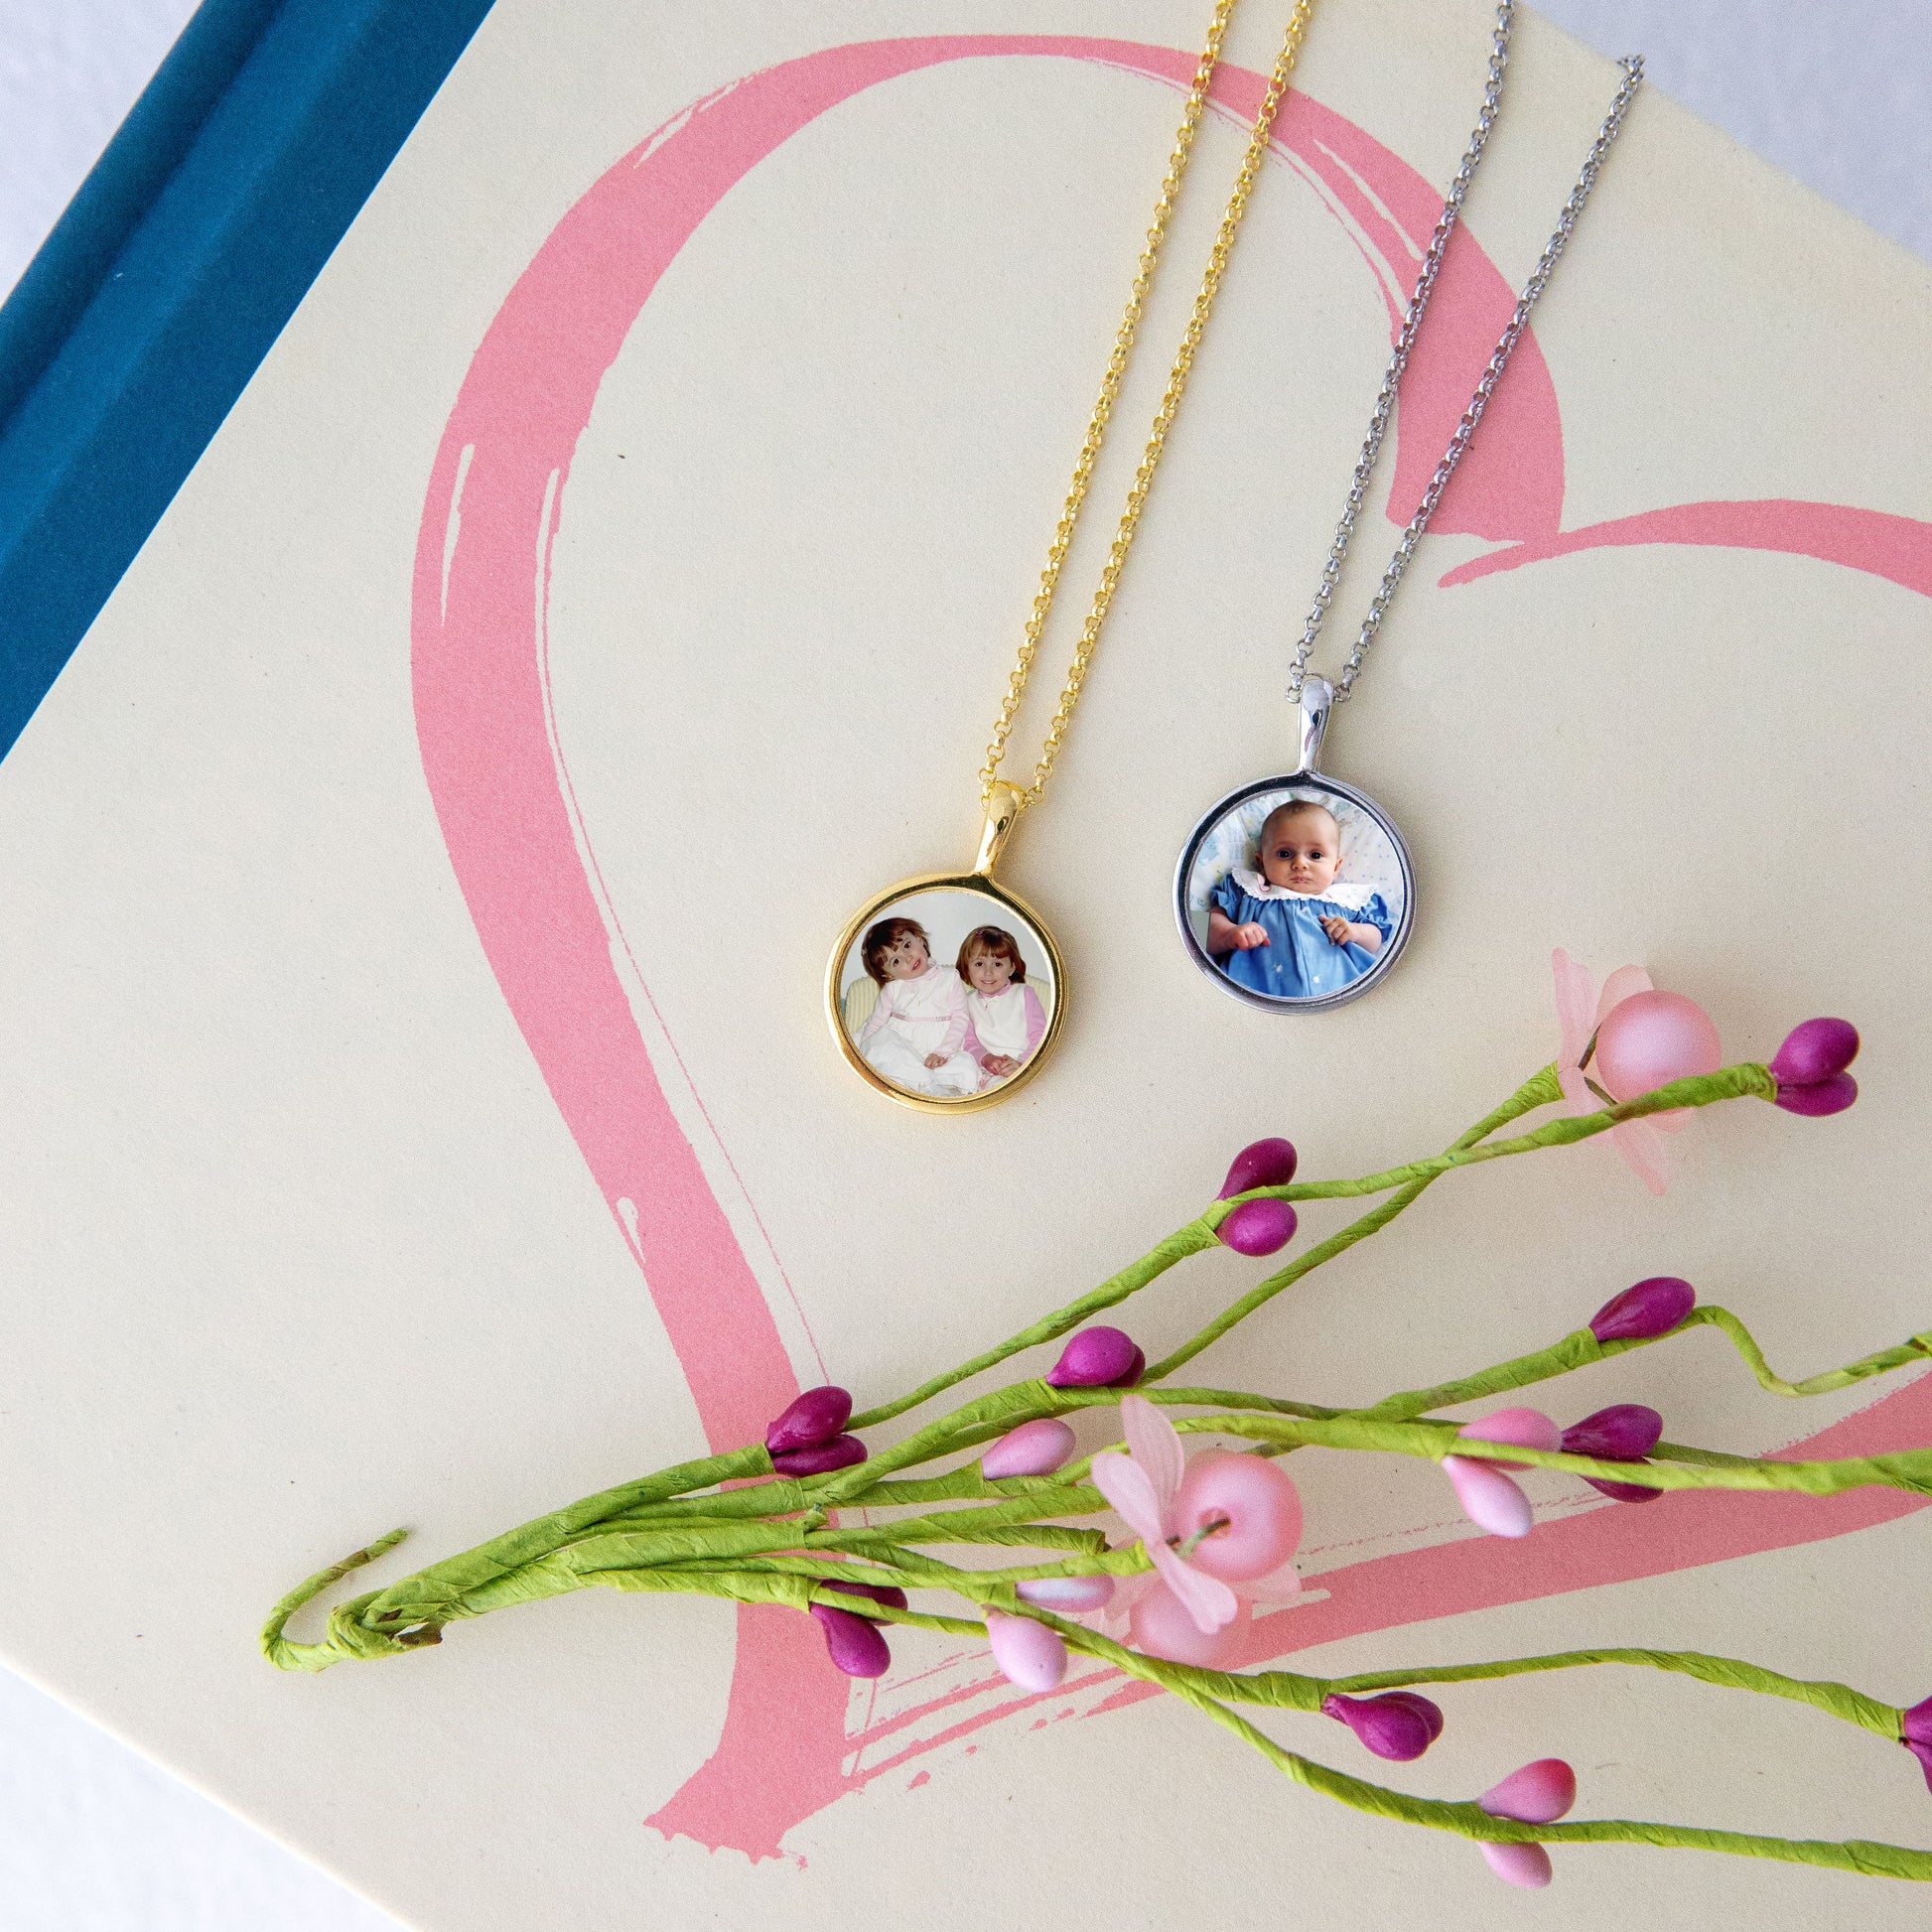 Custom Open Lockets with personalized images showing examples of children